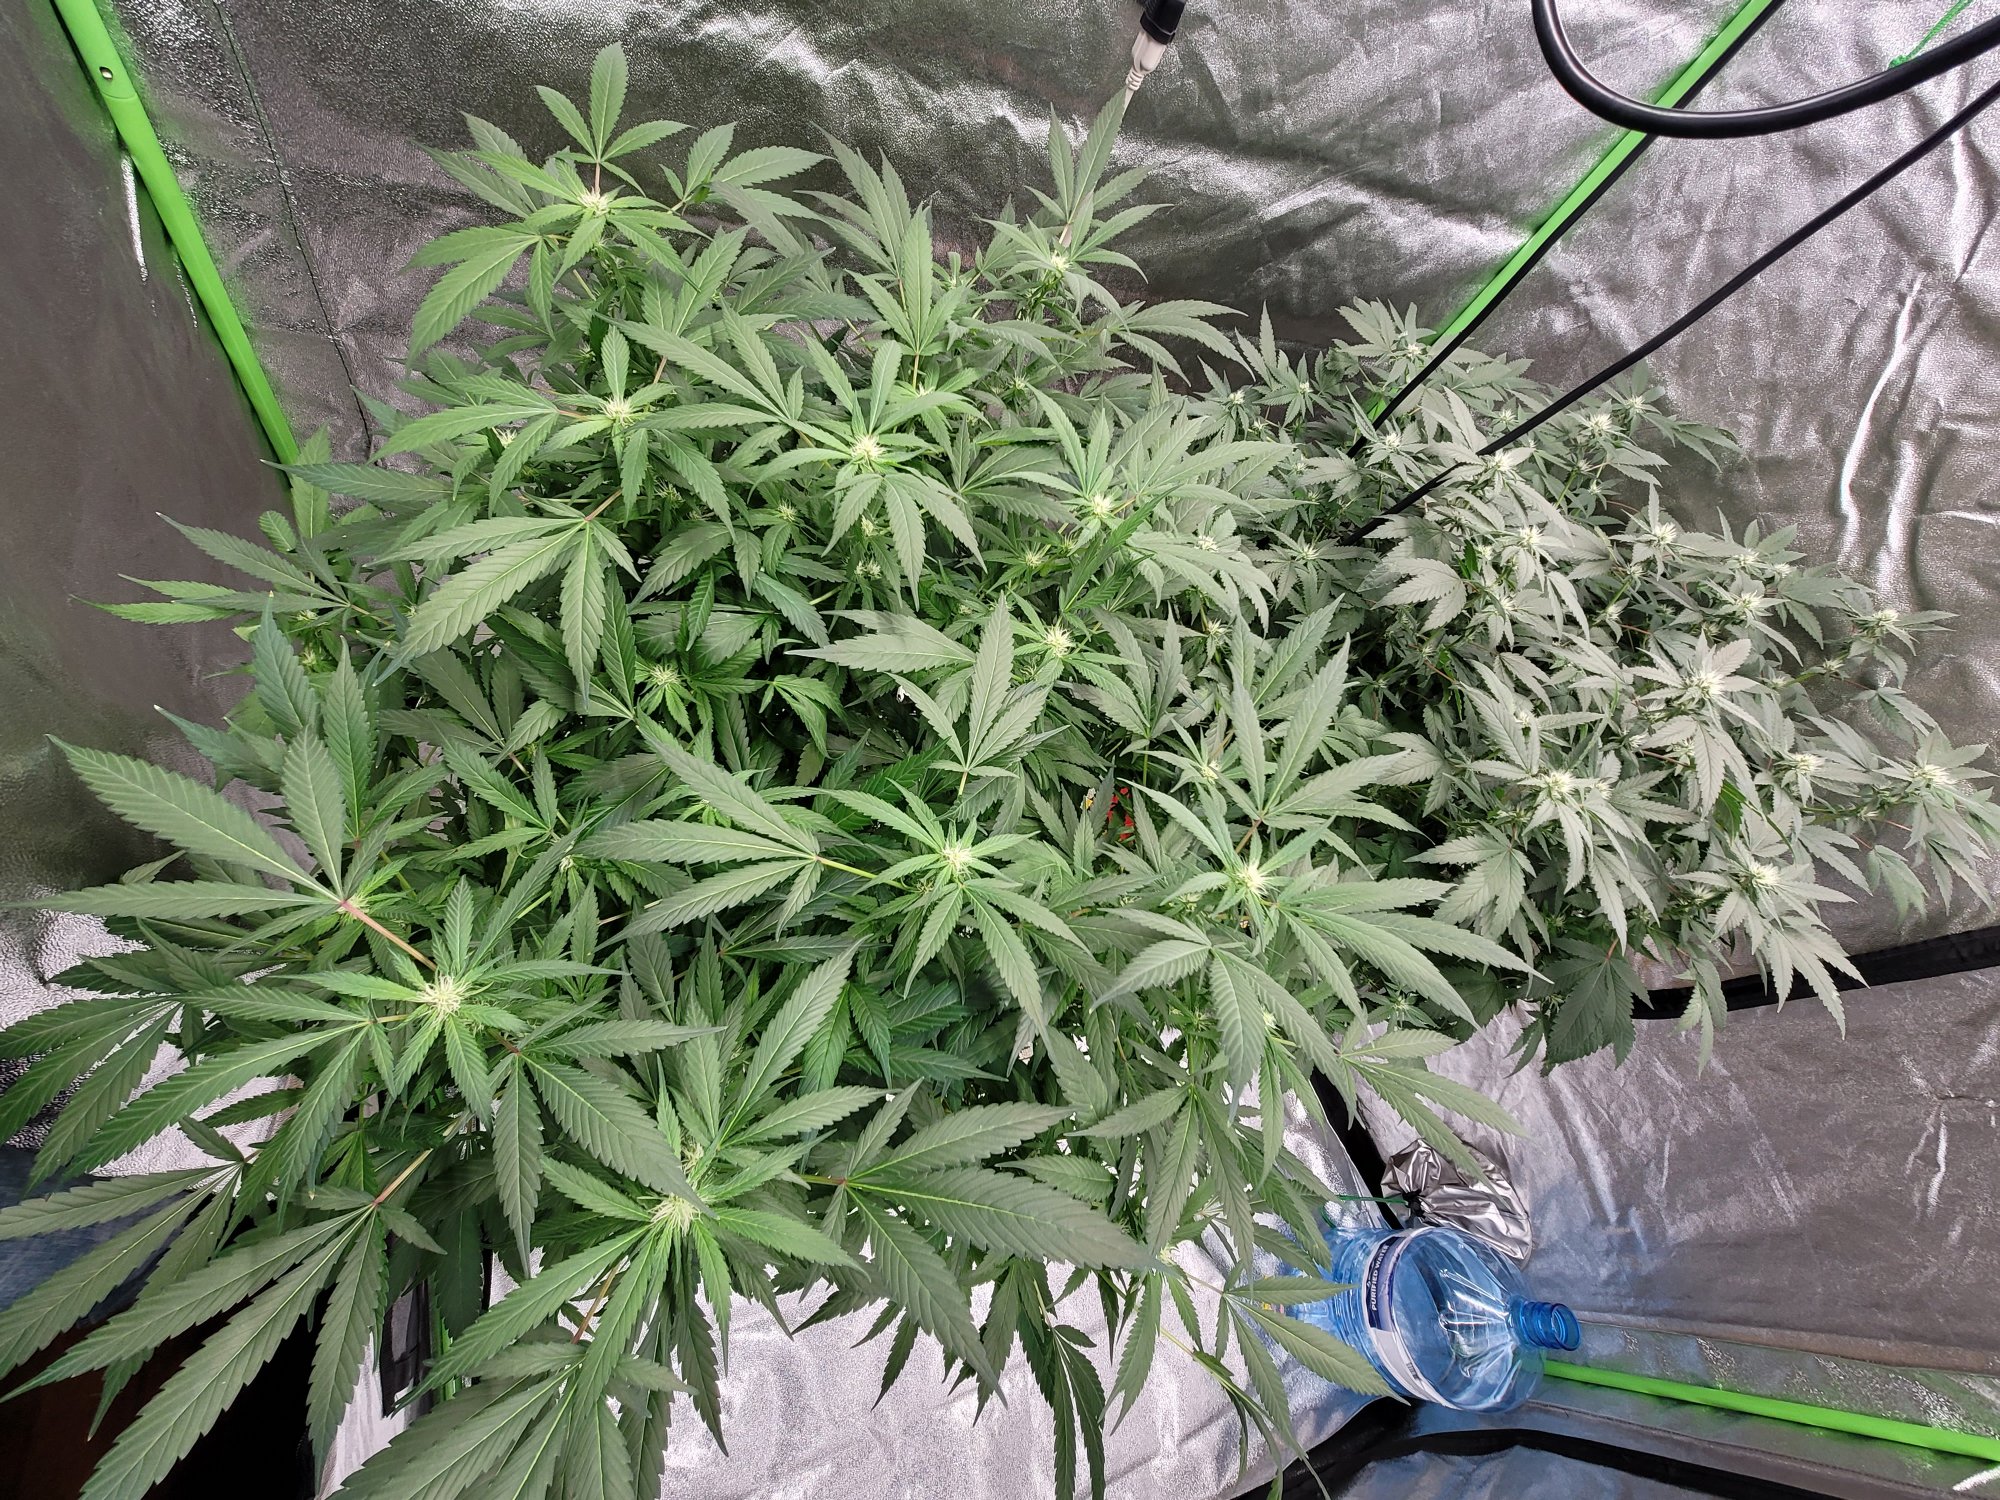 Week 3 and 4 of flower respectively